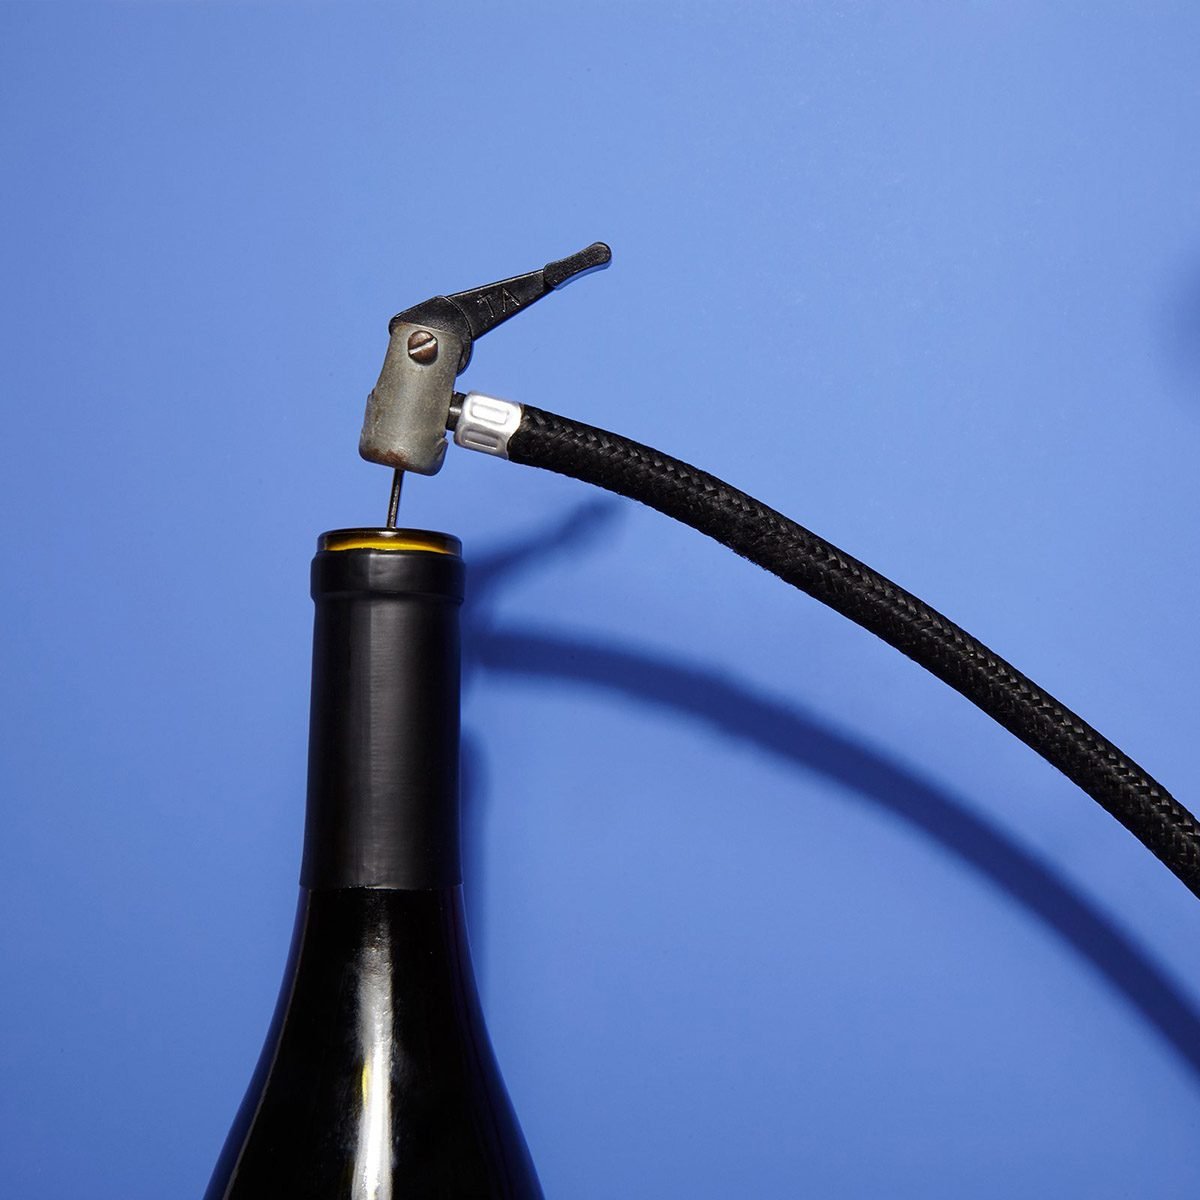 Pumping air into a wine bottle